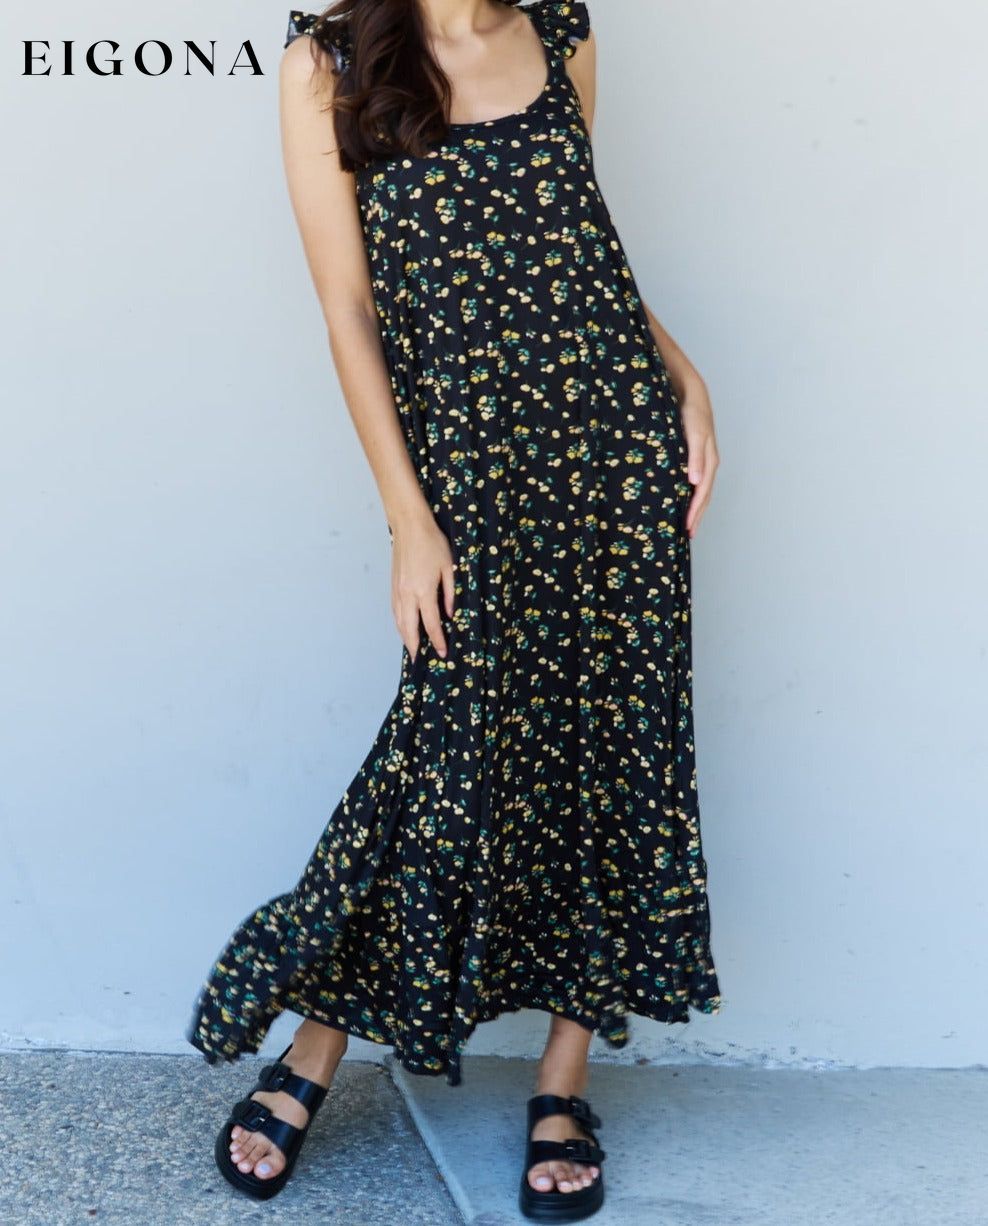 Ruffle Floral Maxi Dress in Black Yellow Floral casual dress casual dresses clothes dress dresses Labor Day Sale maxi dress maxi dresses Ninexis Ship from USA